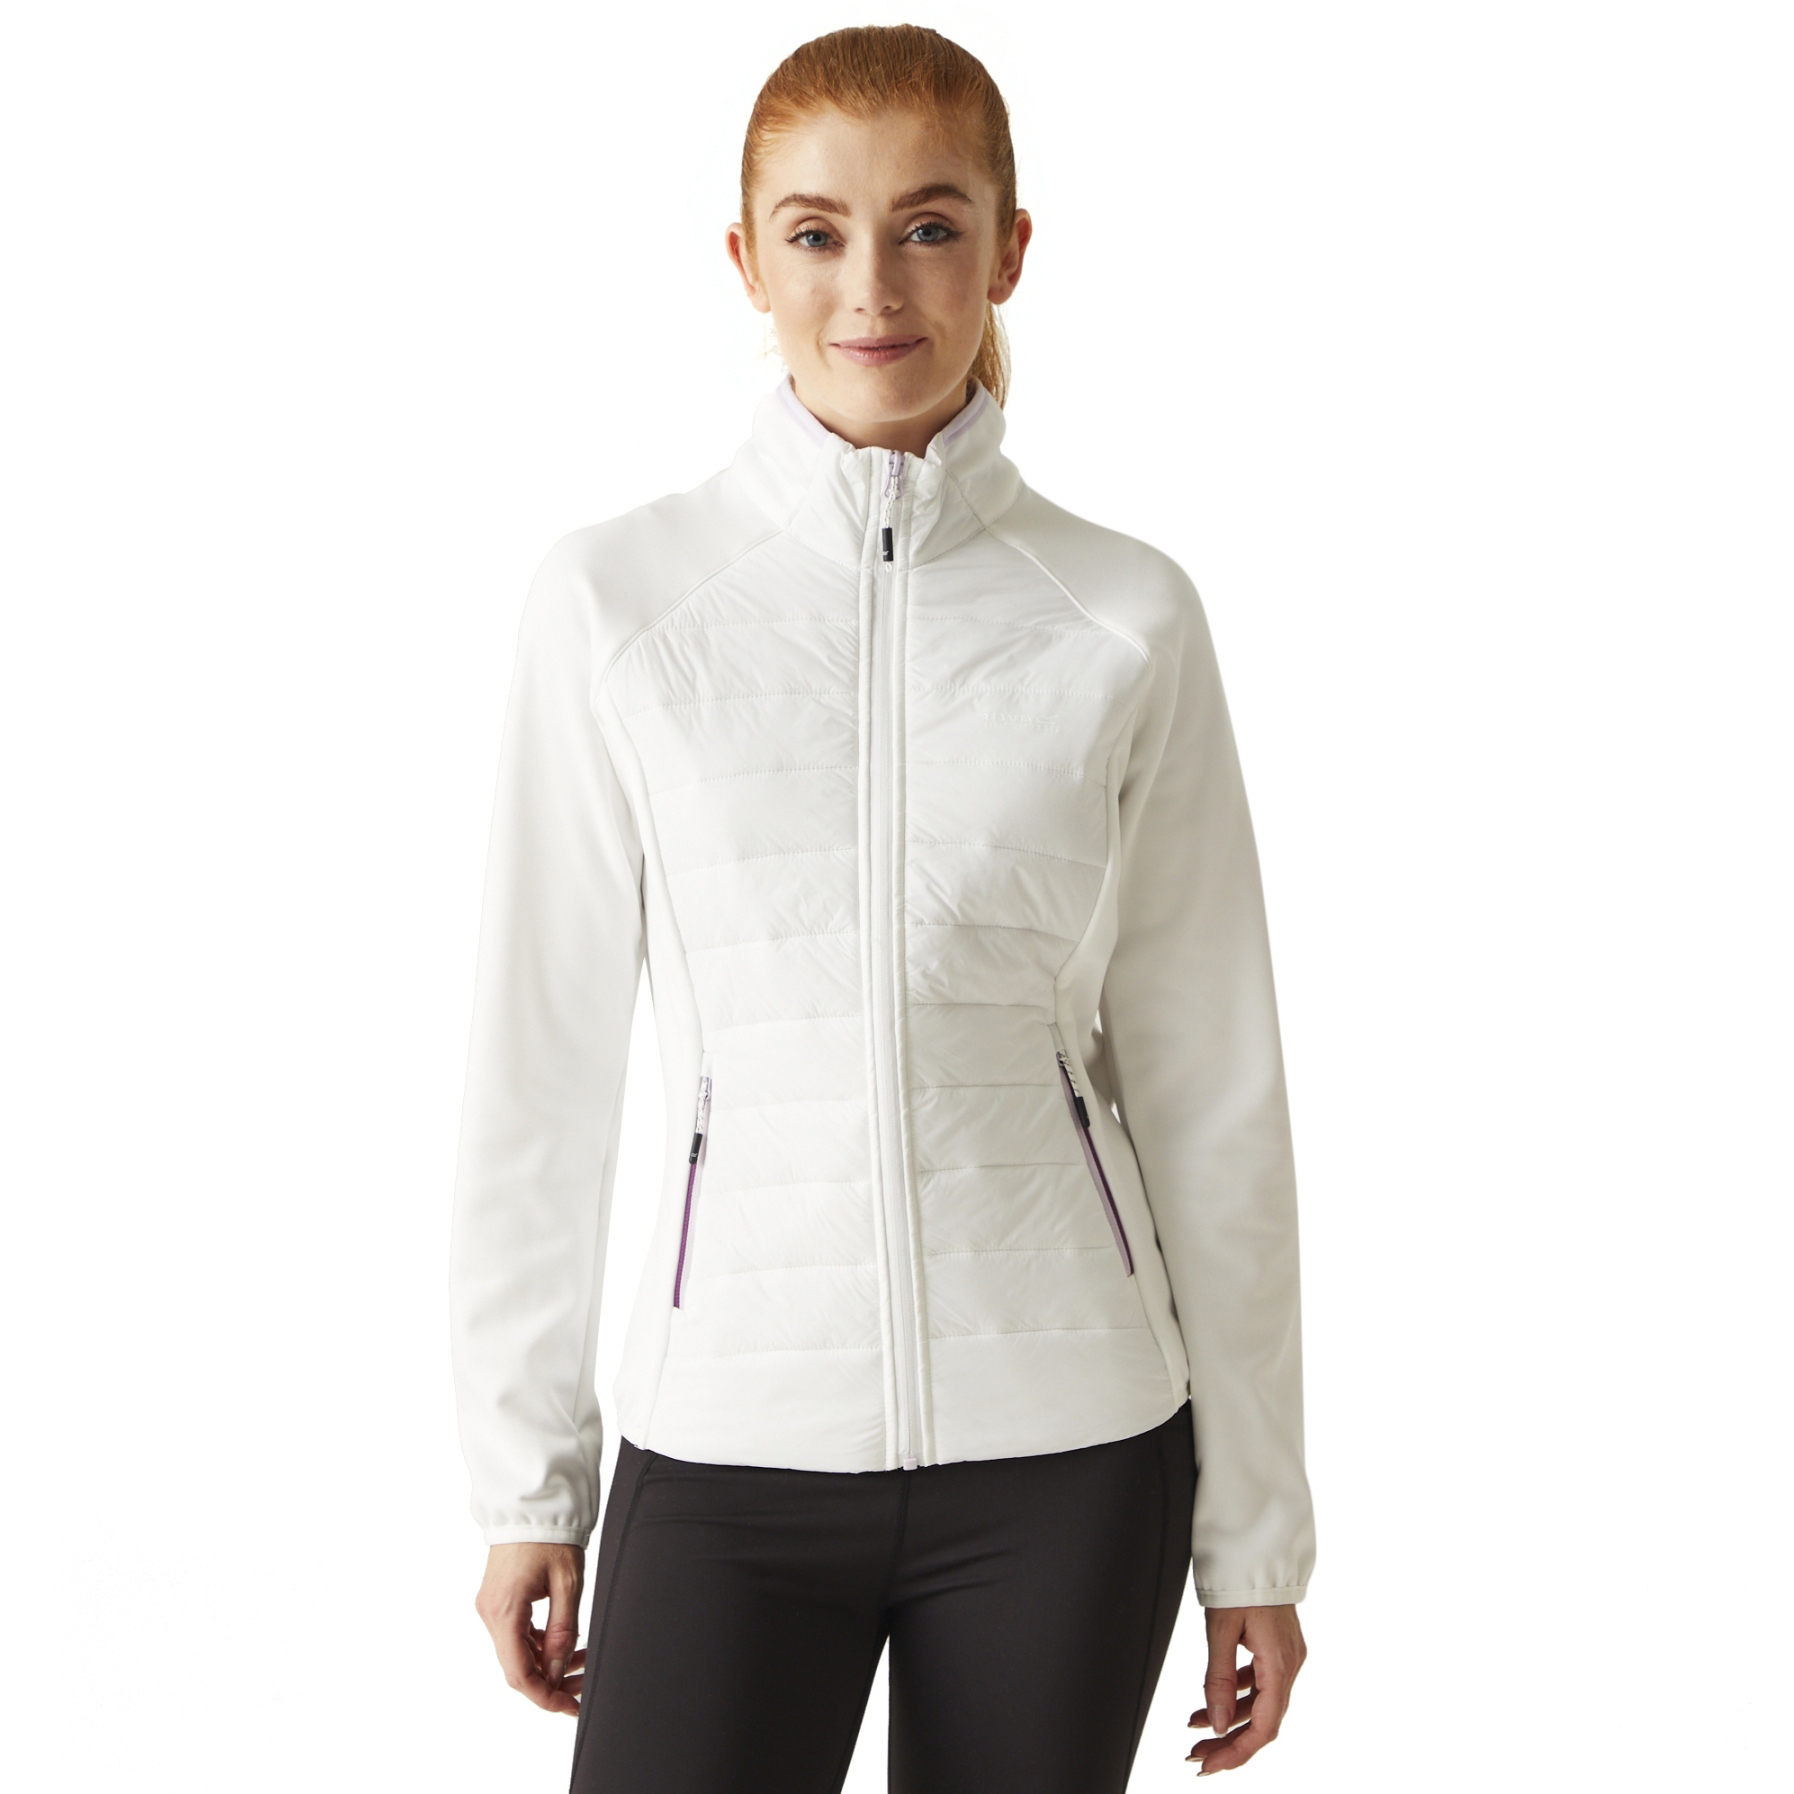 Picture of Regatta Clumber V Hybrid Jacket Women - White/Lilac Frost LLW